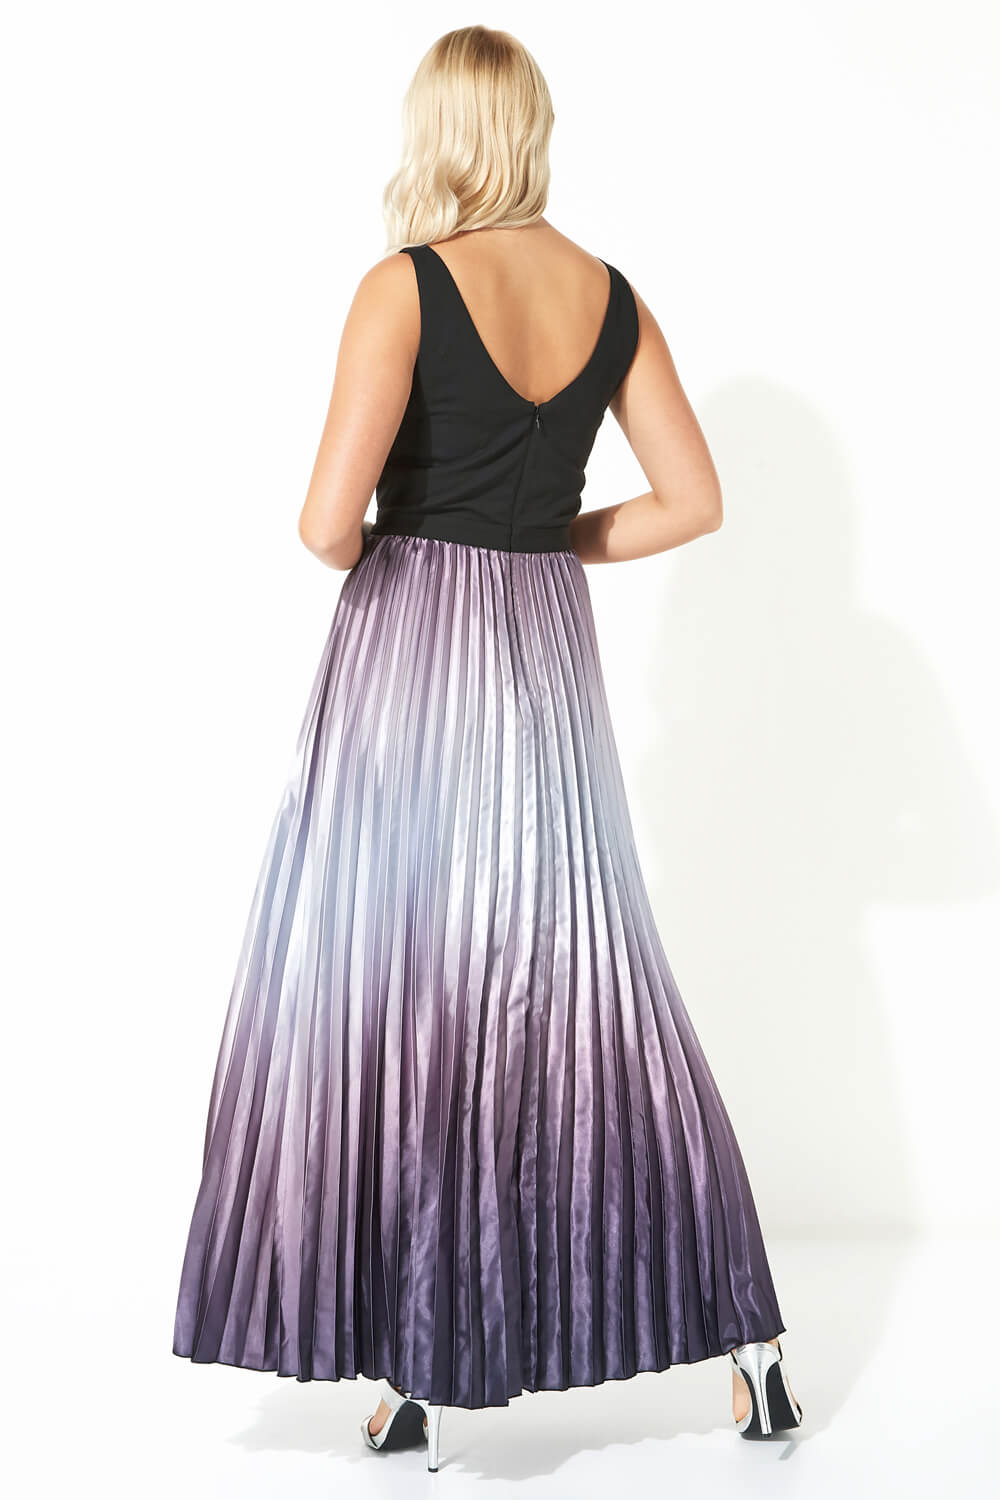 Purple Ombre Satin Pleated Maxi Dress, Image 3 of 5